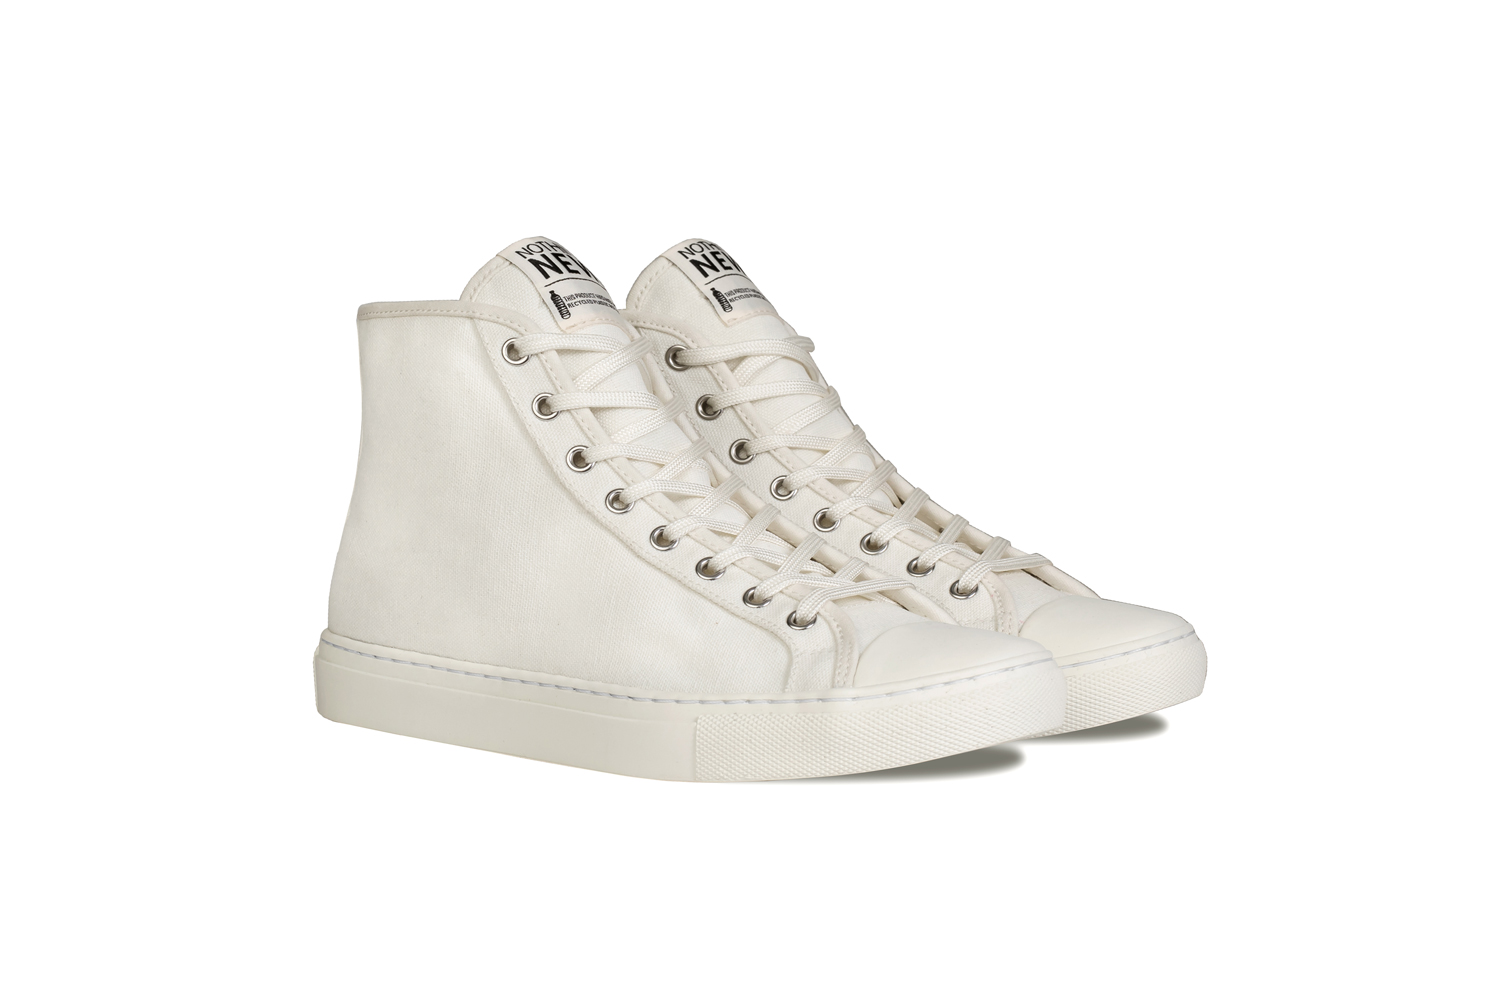 nothing new sustainable sneakers shoes offwhite high top